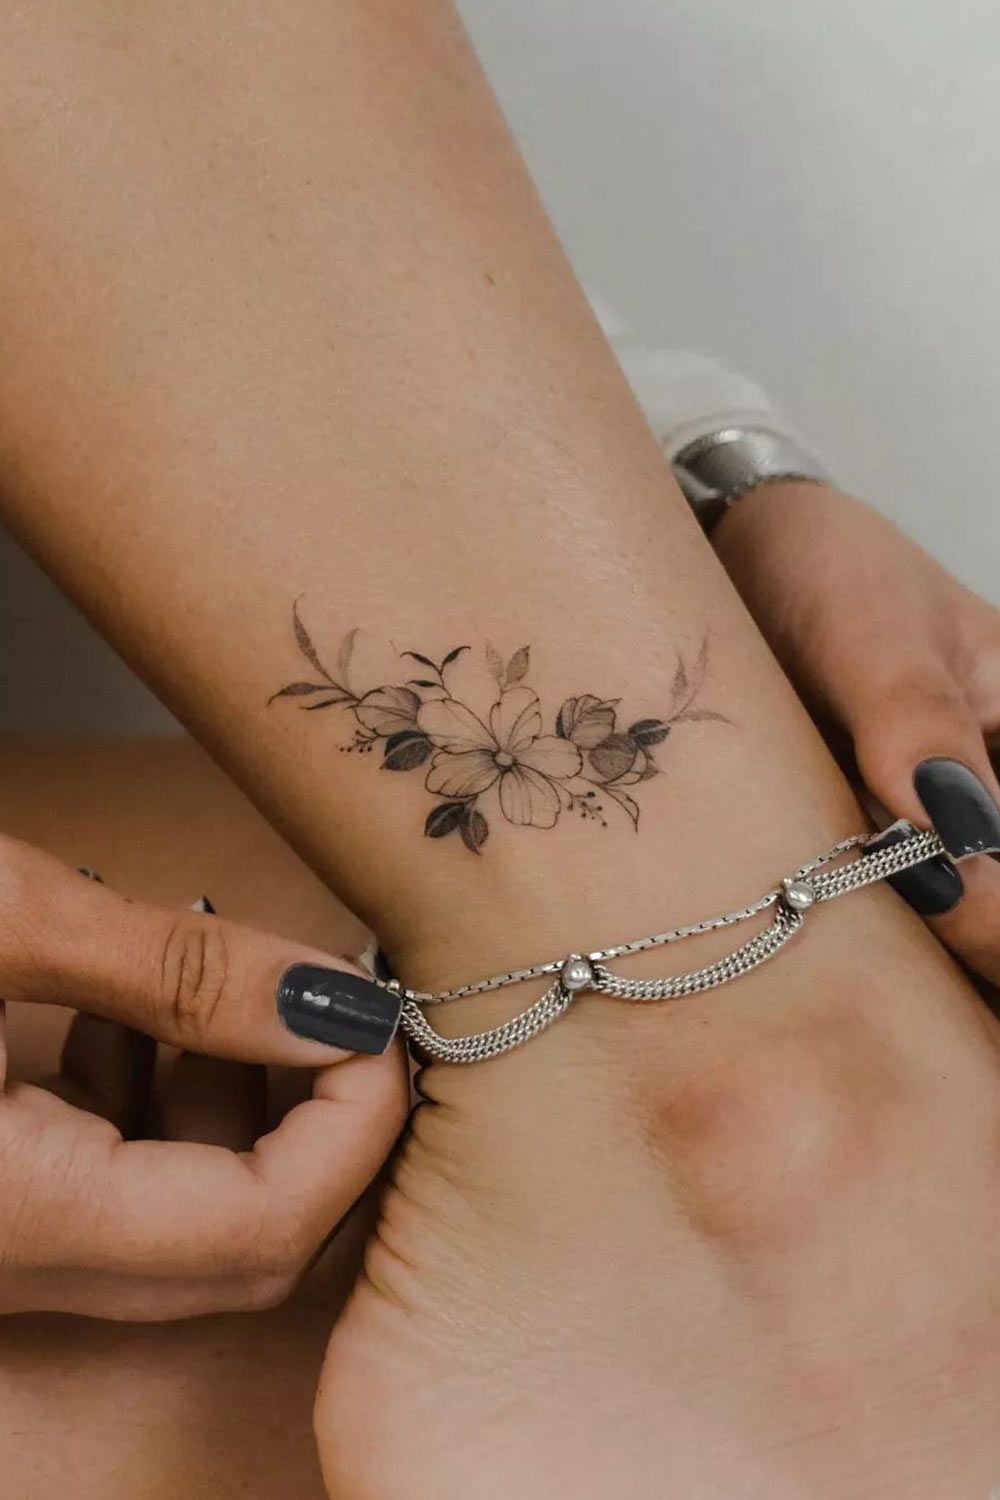 Awesome ankle tattoos for women